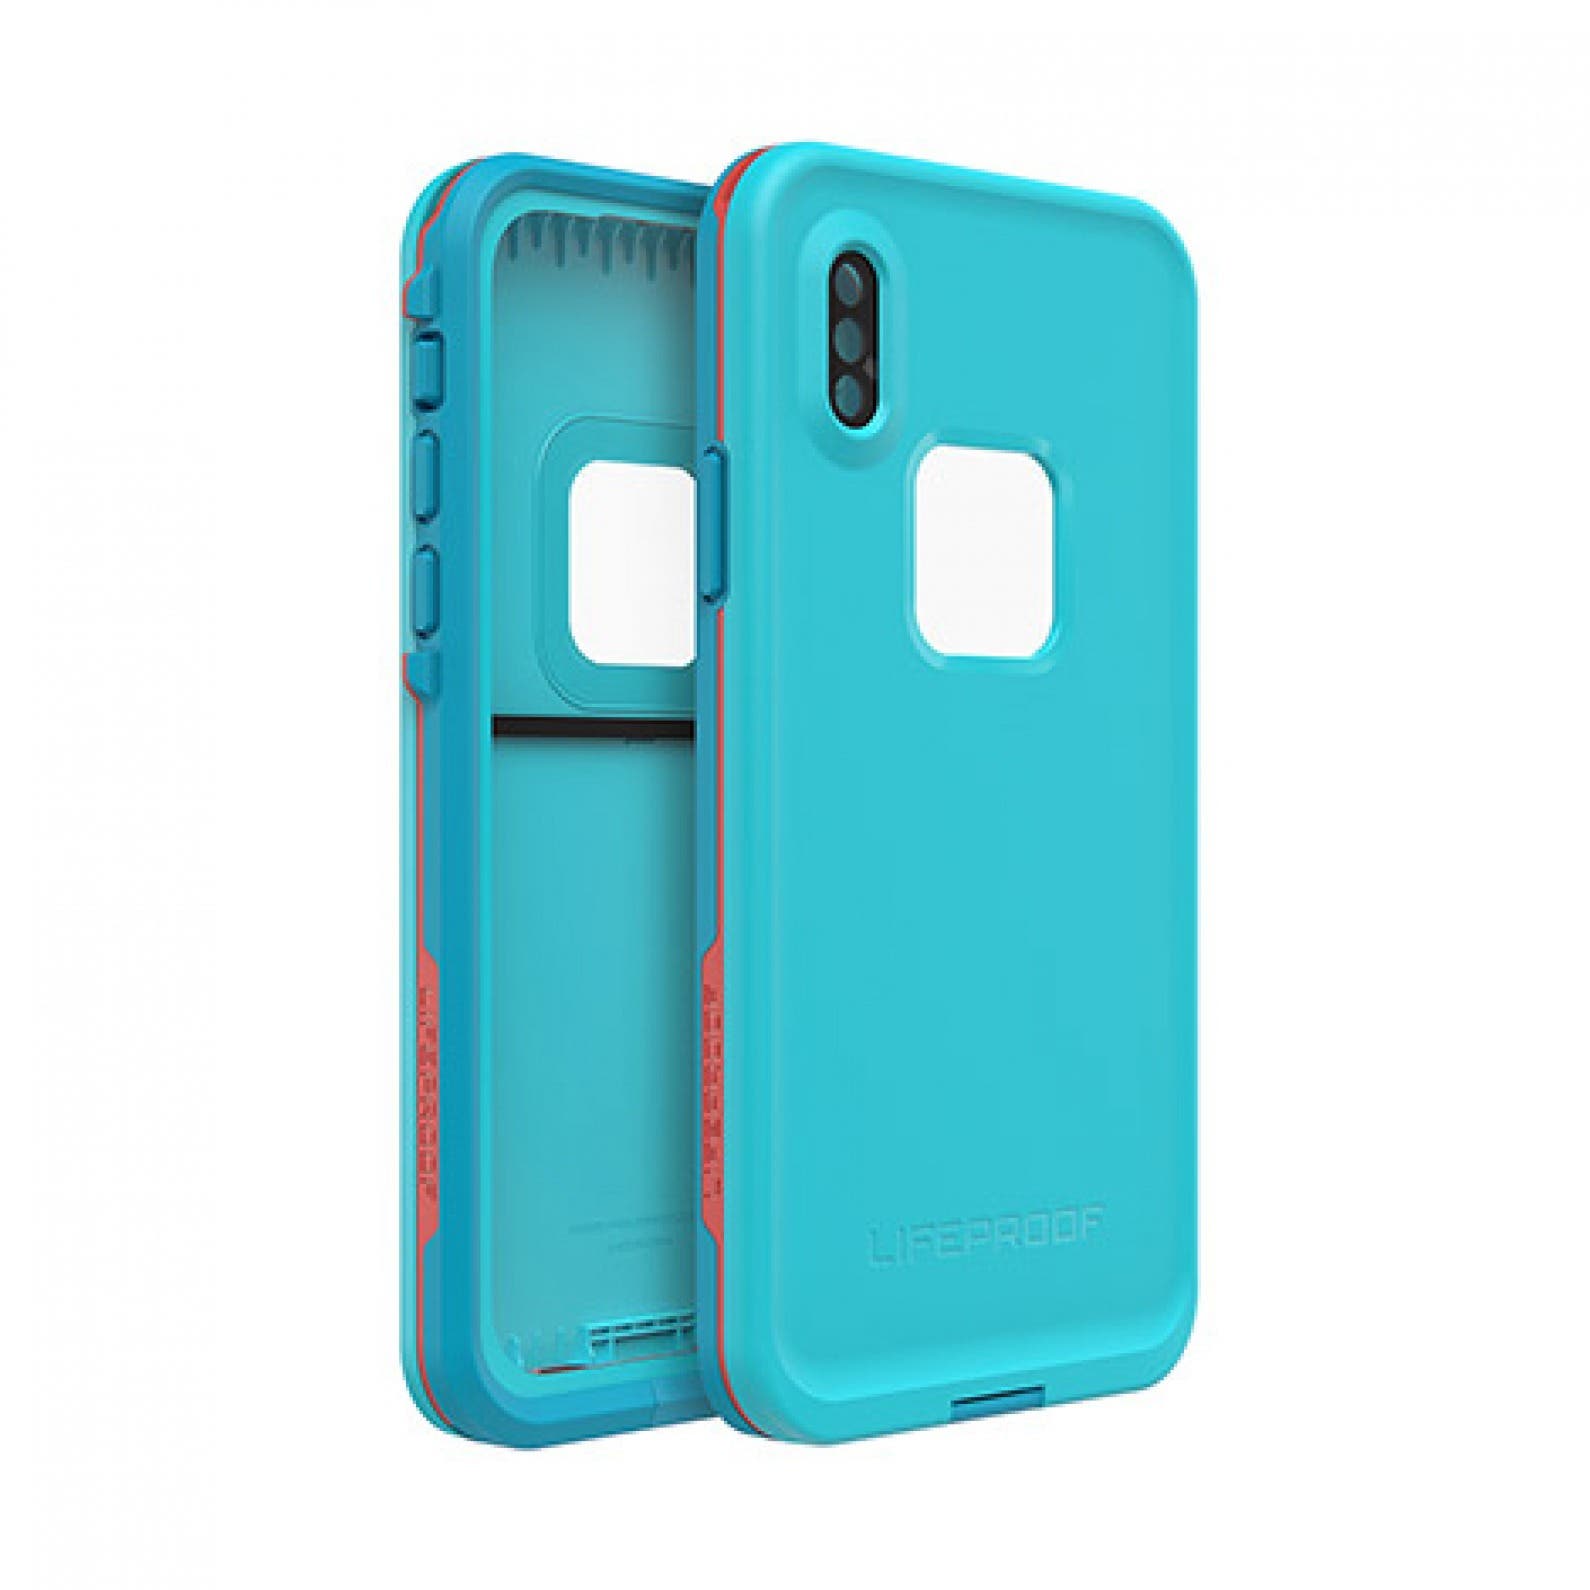 The Most Expensive iPhone XS Cases You Can Get - 3uTools